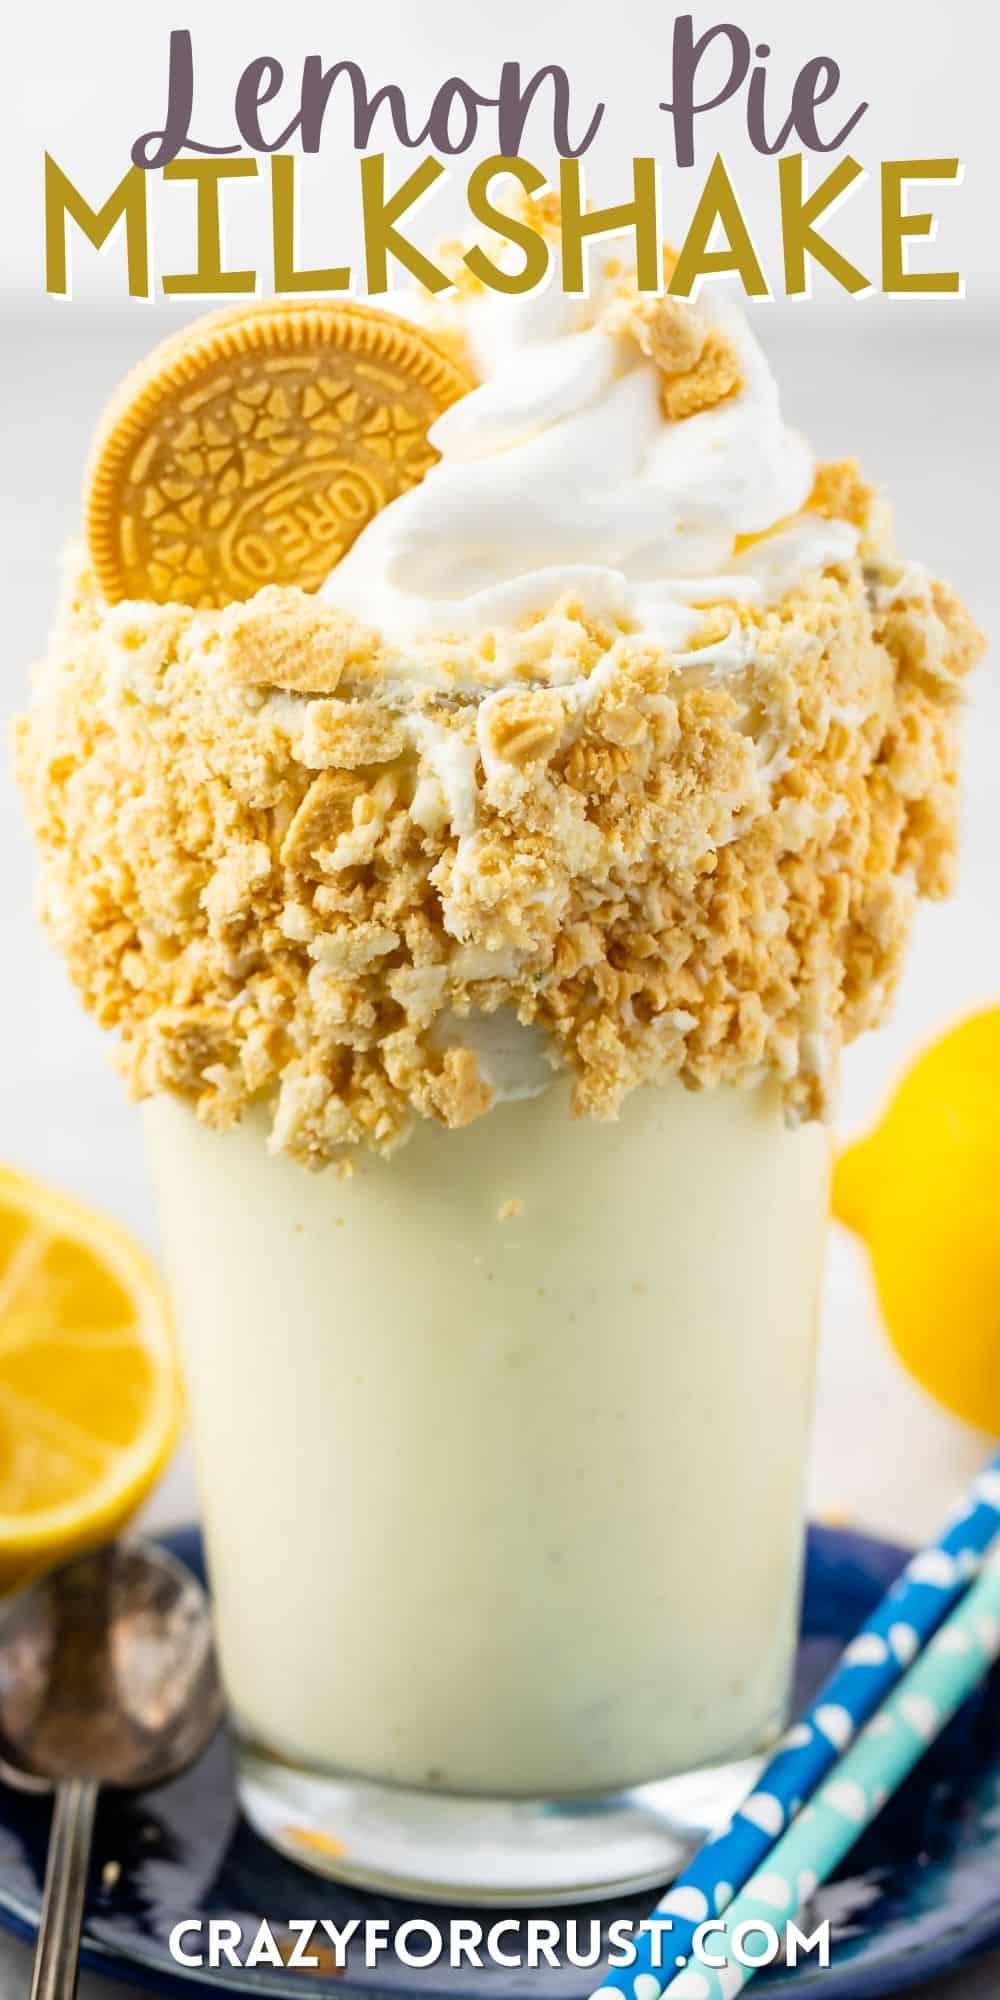 lemon milkshake in a clear glass and crushed golden oreos around the rim of the glass with words on the image.